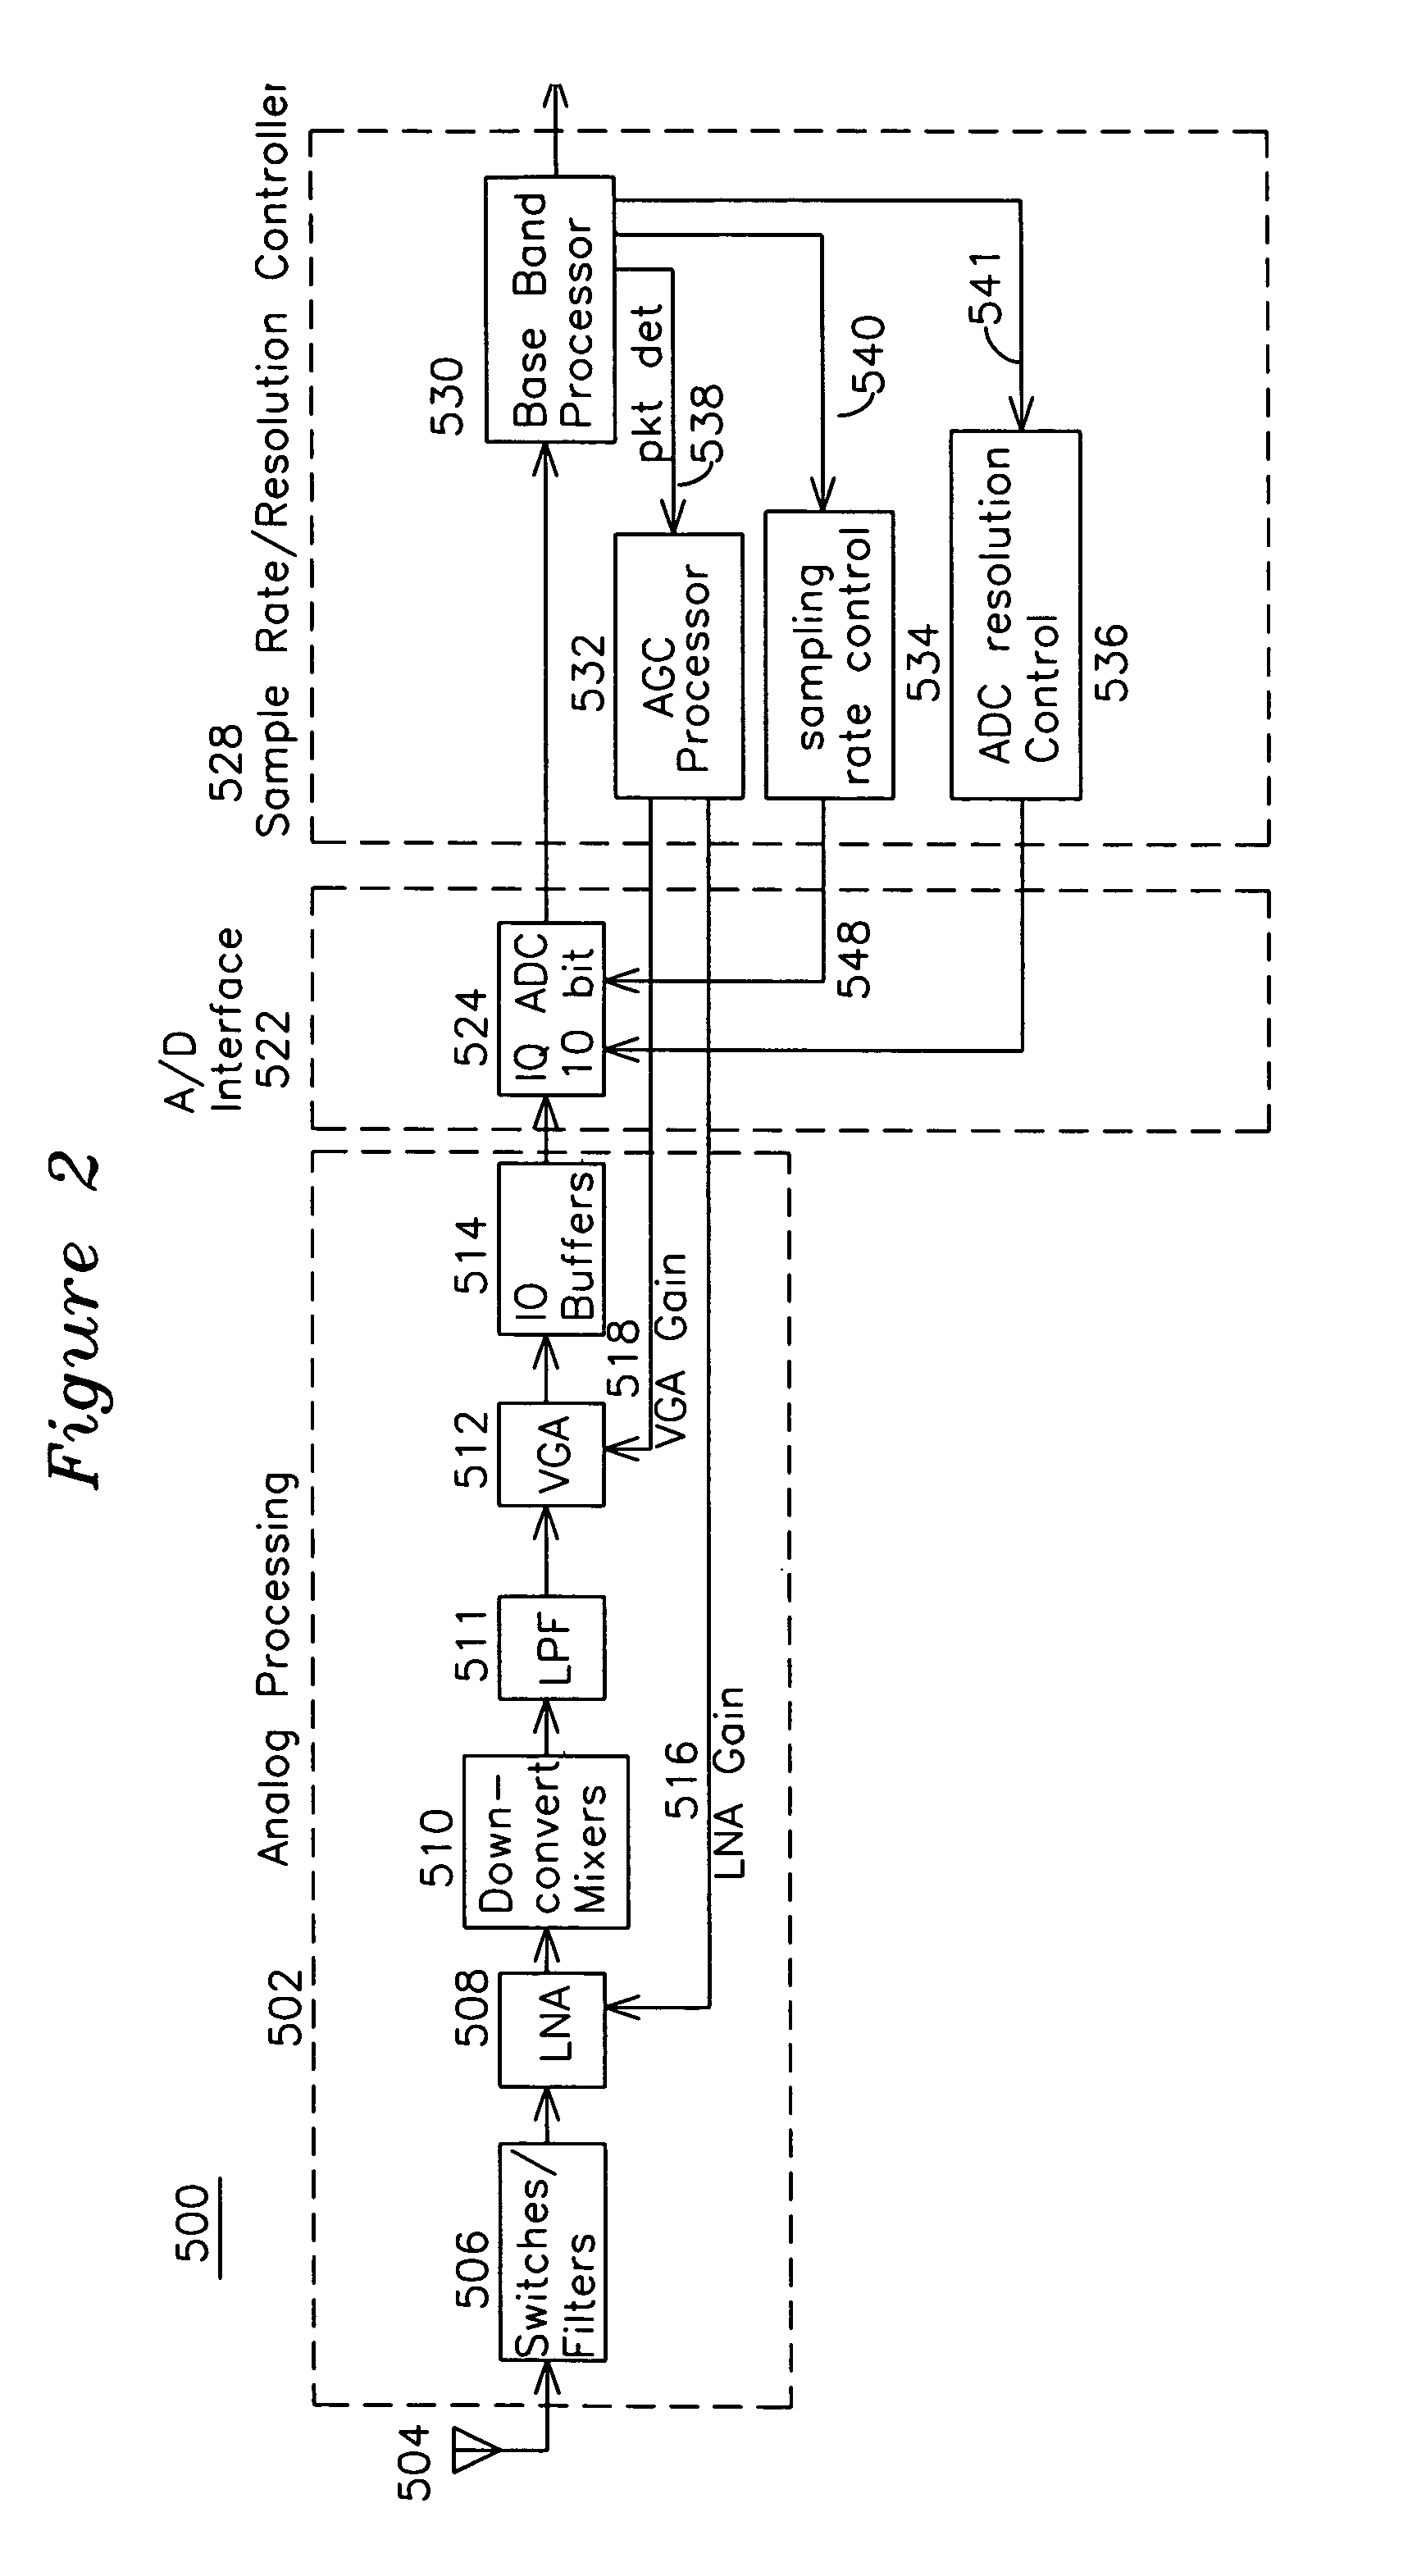 Apparatus for a wireless communications system using signal energy to control sample resolution and rate